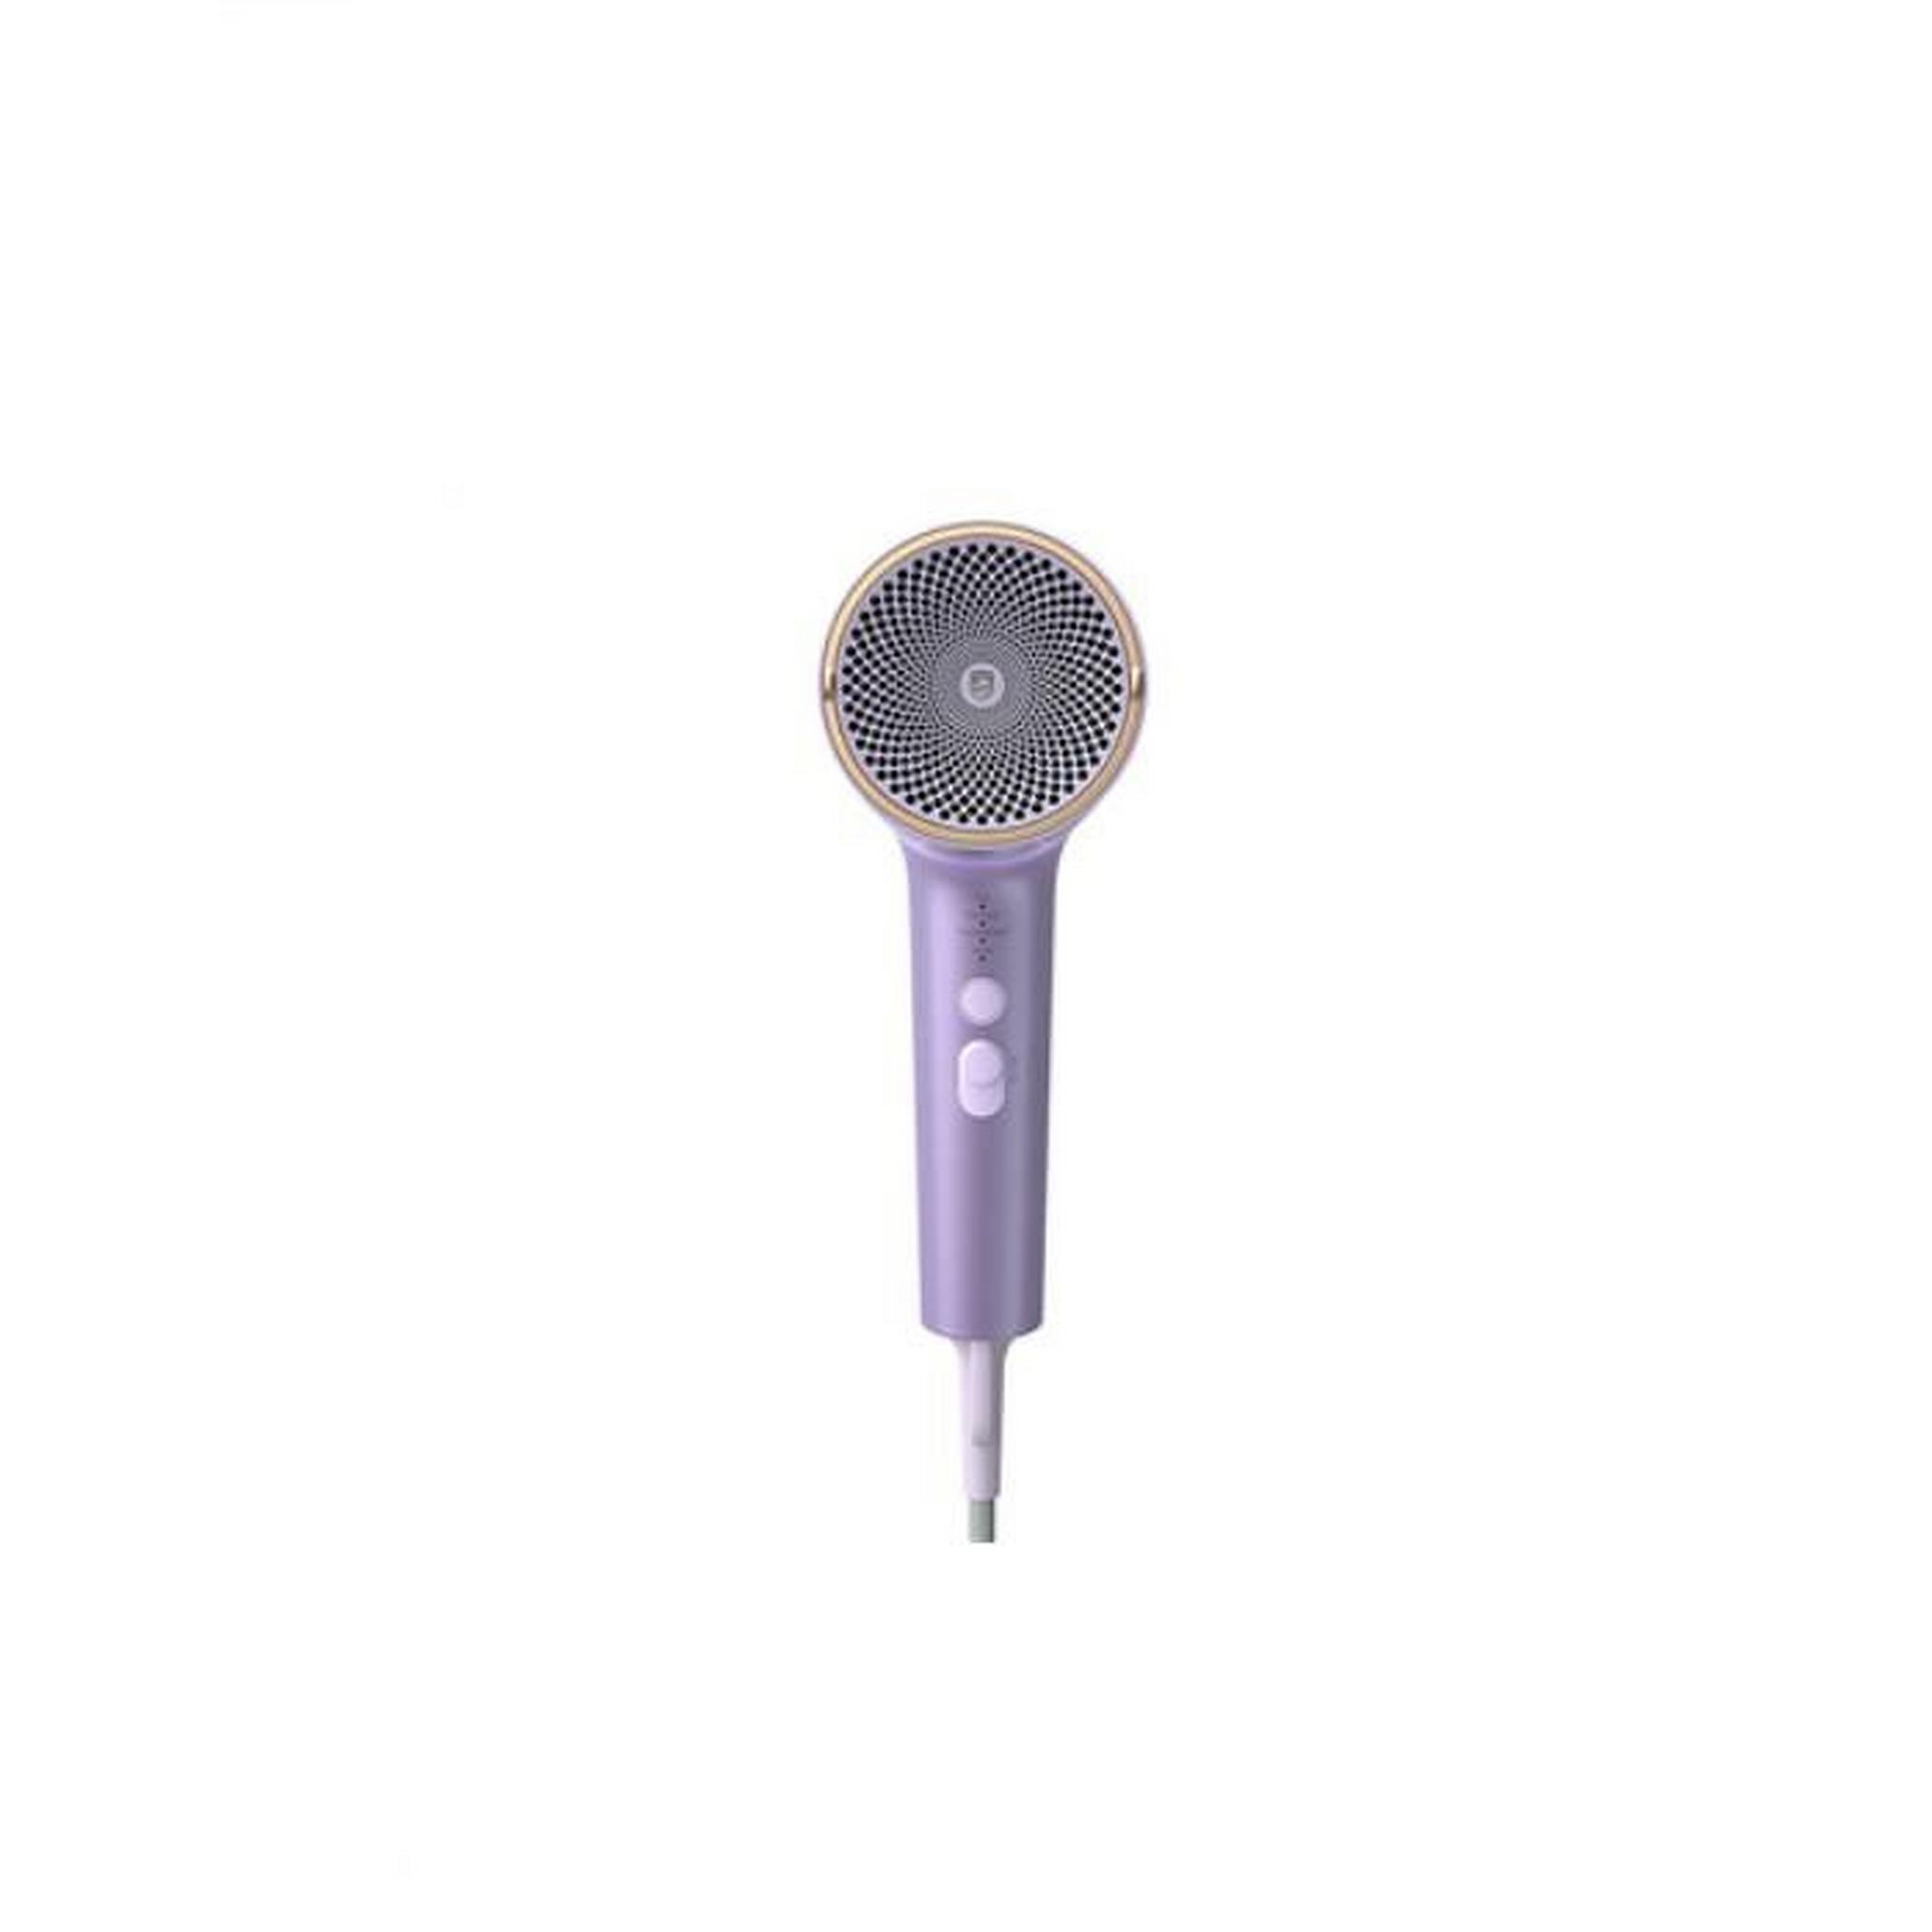 Philips 7000 Series Hair Dryer, 1800W with Ionic Care, 2 Years Warranty, BHD720/13 - Metallic Lilac